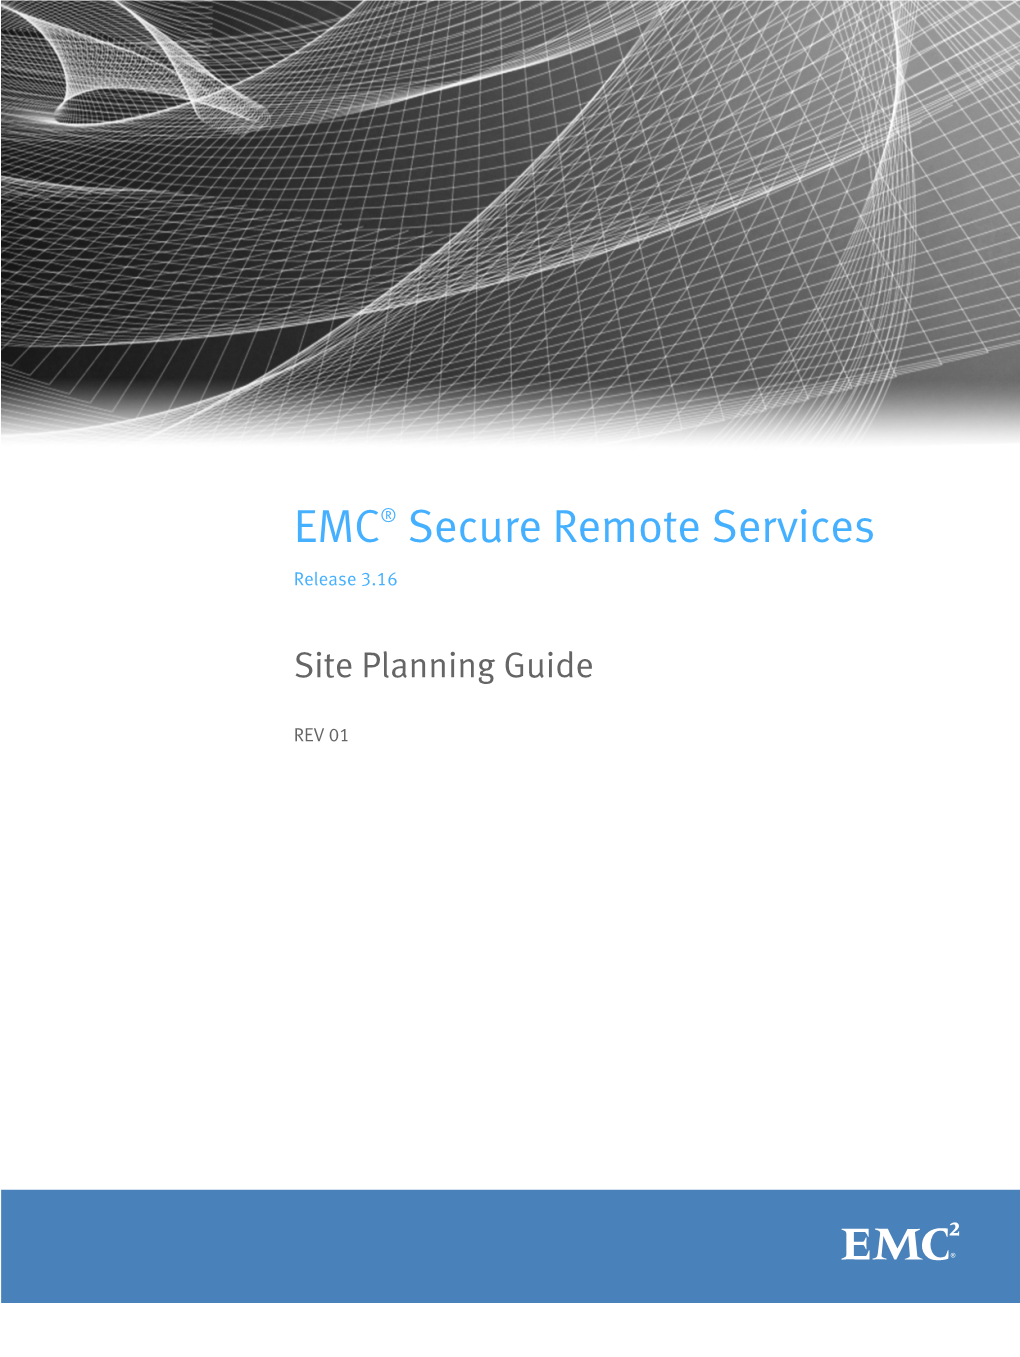 EMC Secure Remote Services 3.16 Site Planning Guide